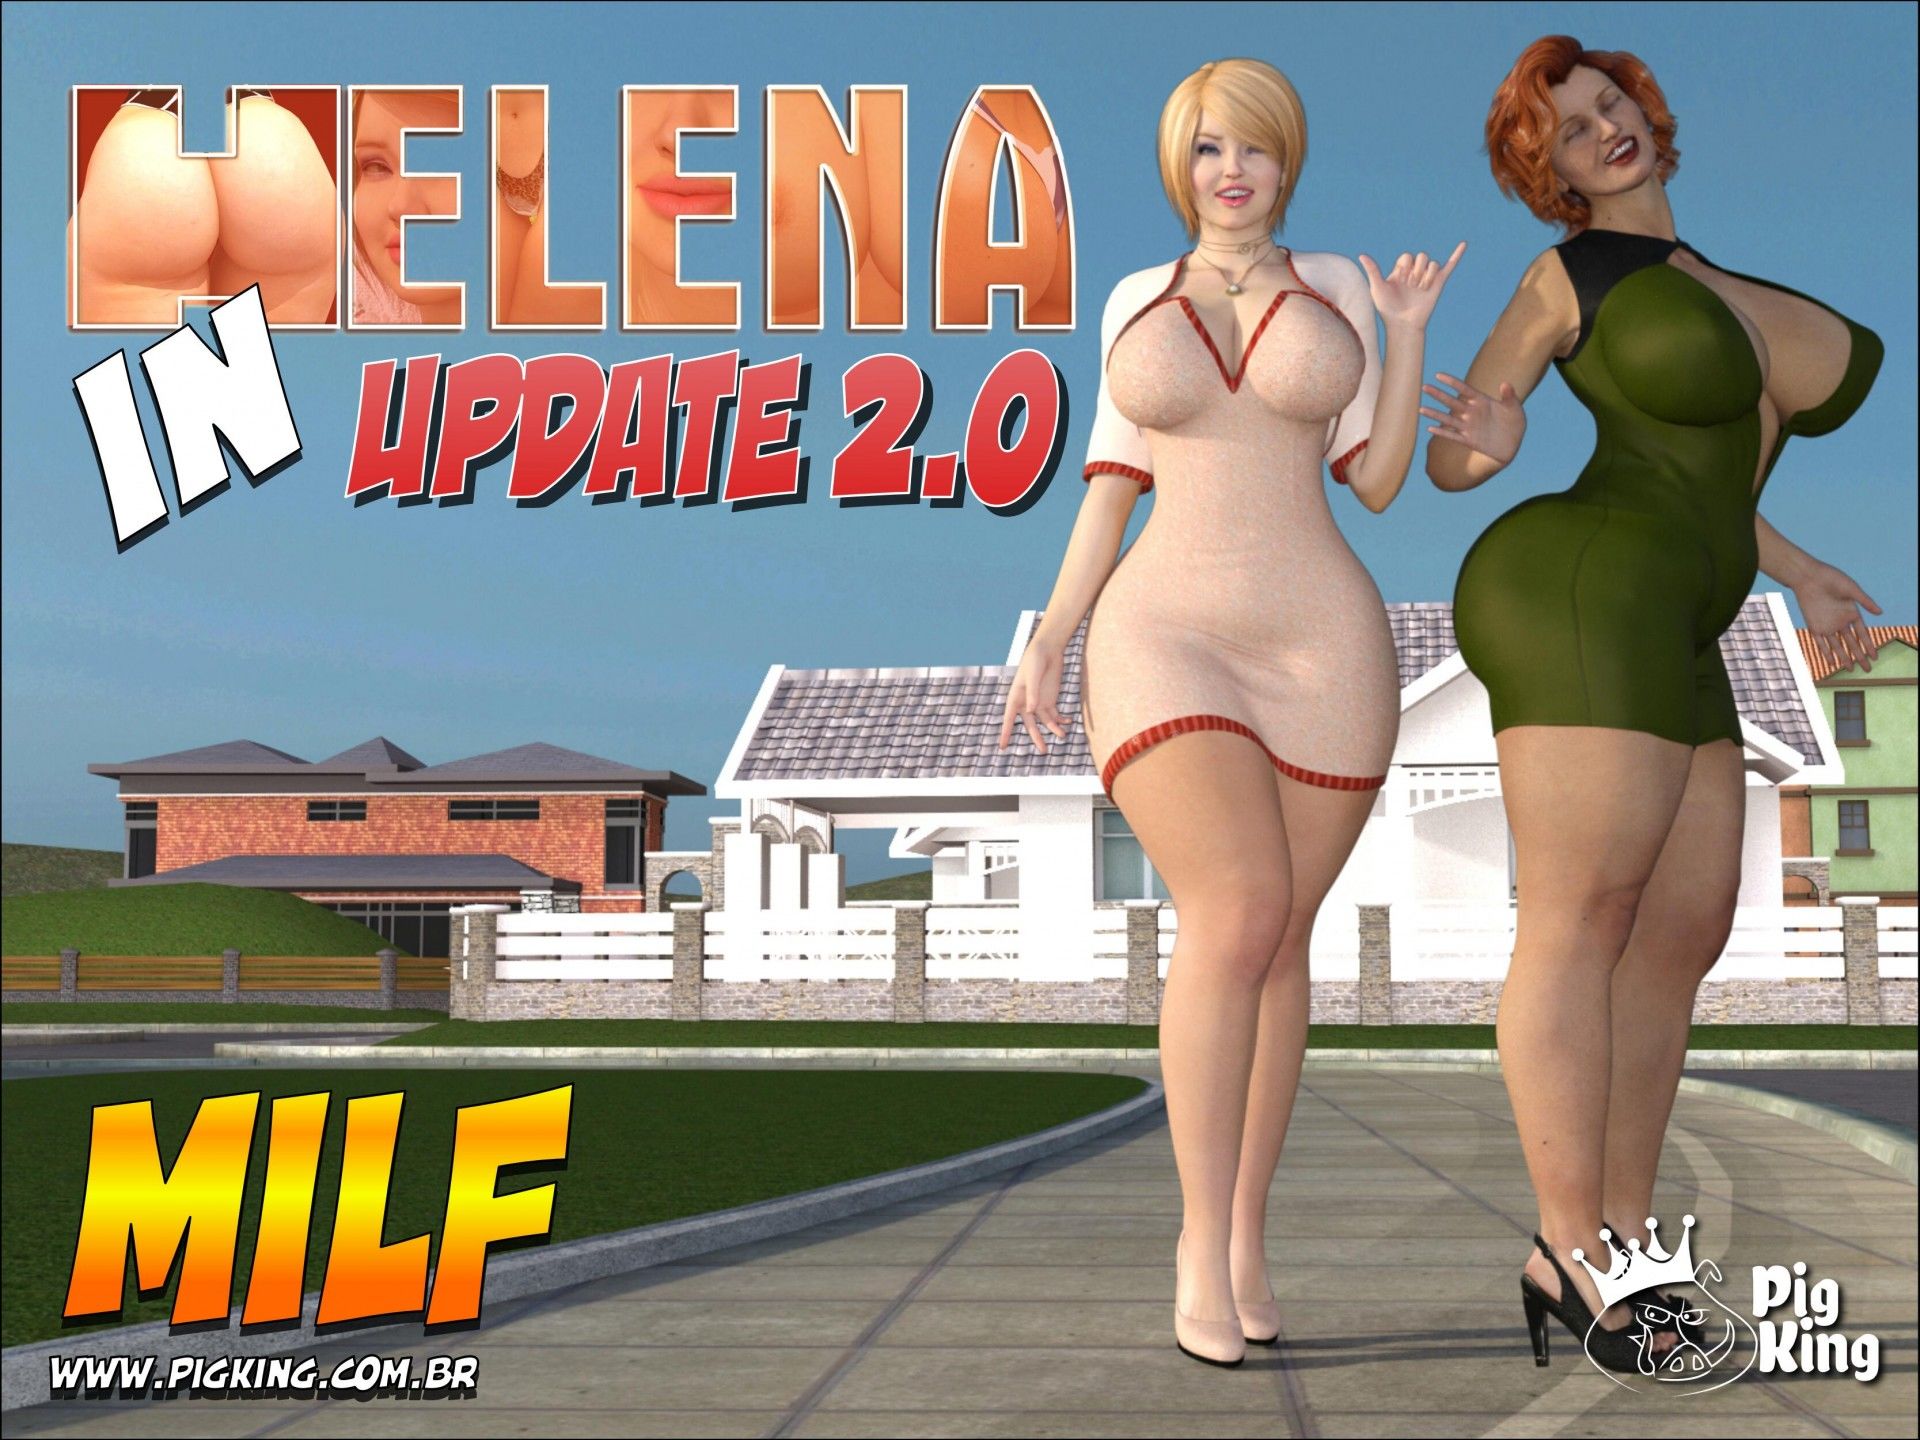 Melena in Update 2.0 PigKing page 1